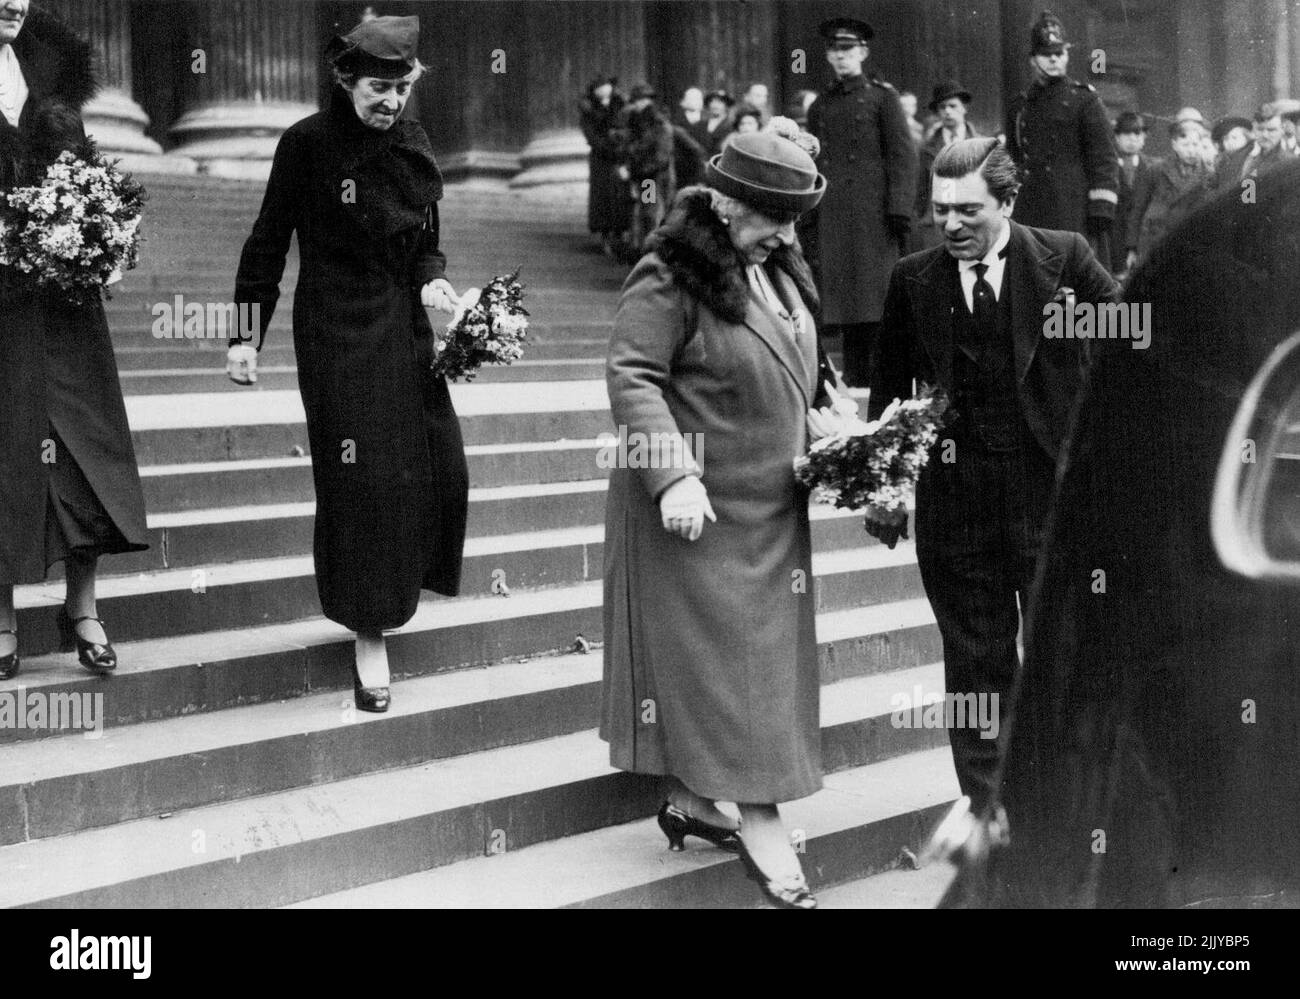 Distribution of Maundy Money At St. Paul's -- Princess Marie Louise (right) and Princess Helena Victoria leaving after the ceremony. The first coins to bear the head of King George VI were specially struck for the Maundy Thursday service held to-day at St. Paul's Cathedral, London. The silver penny, two penny, three penny, and four penny pieces are given to as many old men and women as the King has years of age - 42. March 25, 1937. (Photo by Topical Press). Stock Photo